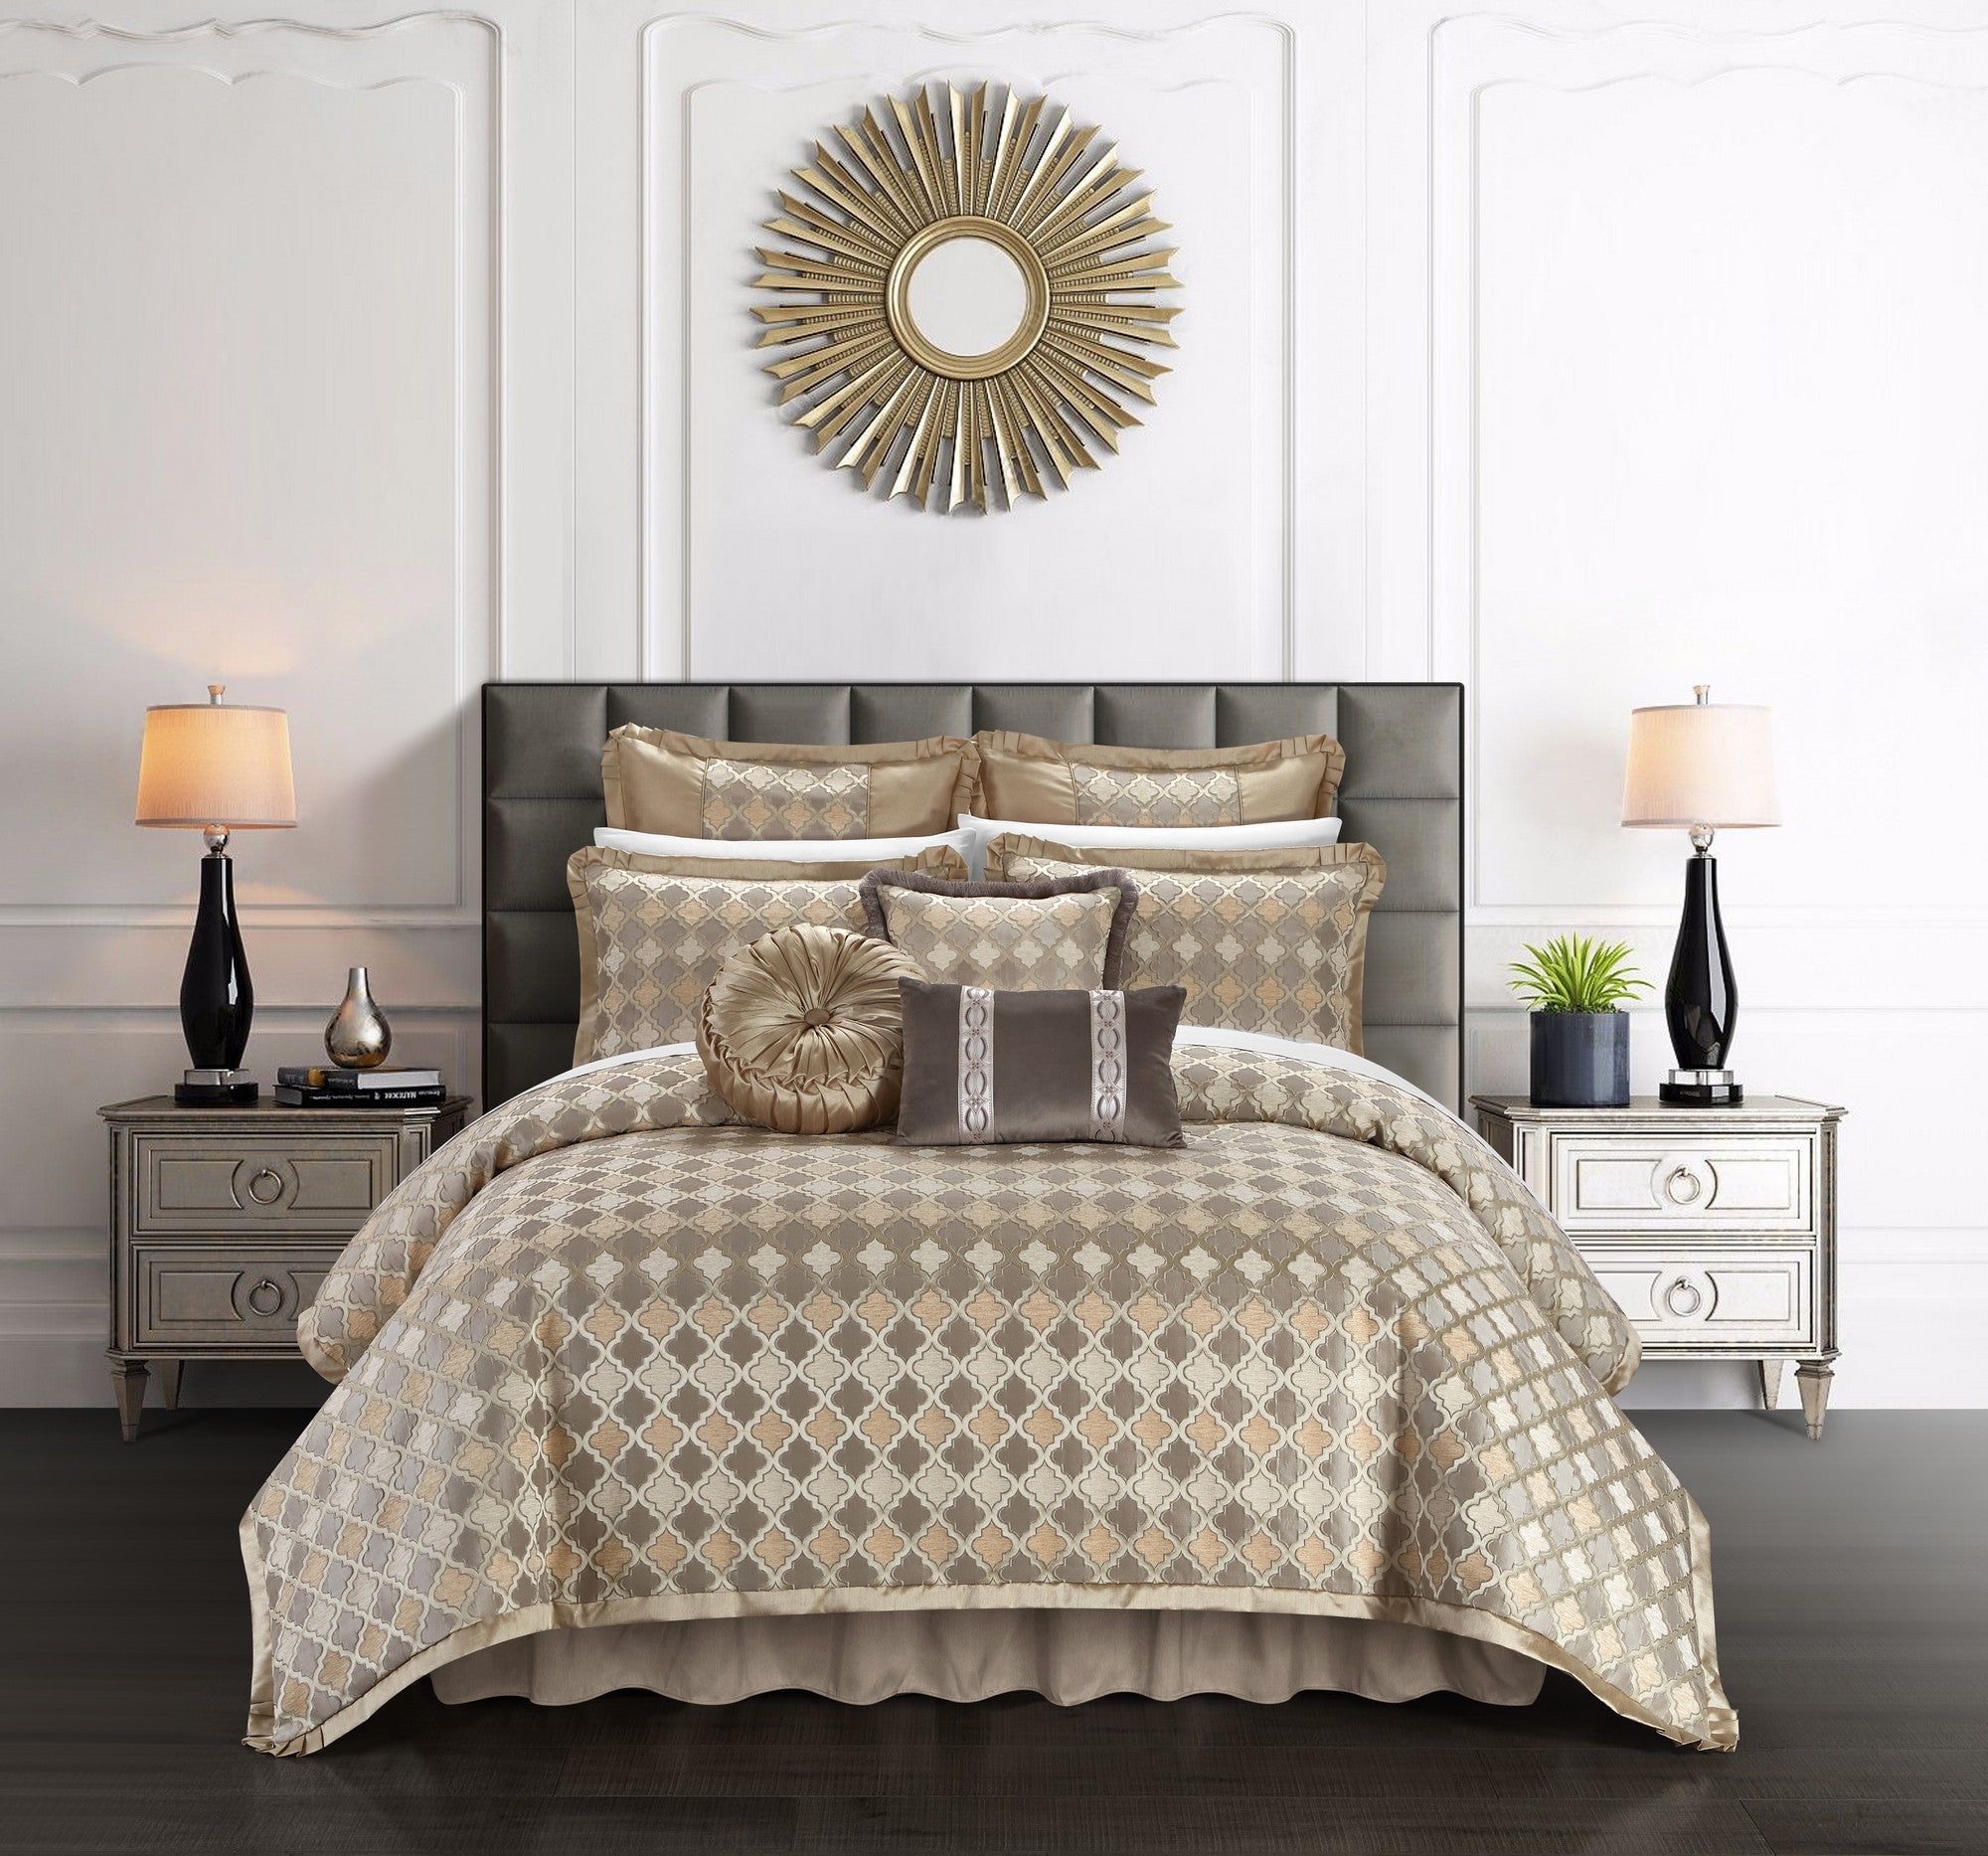 Chic Home Sue Comforter Set Chenille Geometric Scroll Pattern Flange Border Bedding - Bed Skirt Decorative Pillows Shams Included - Beige